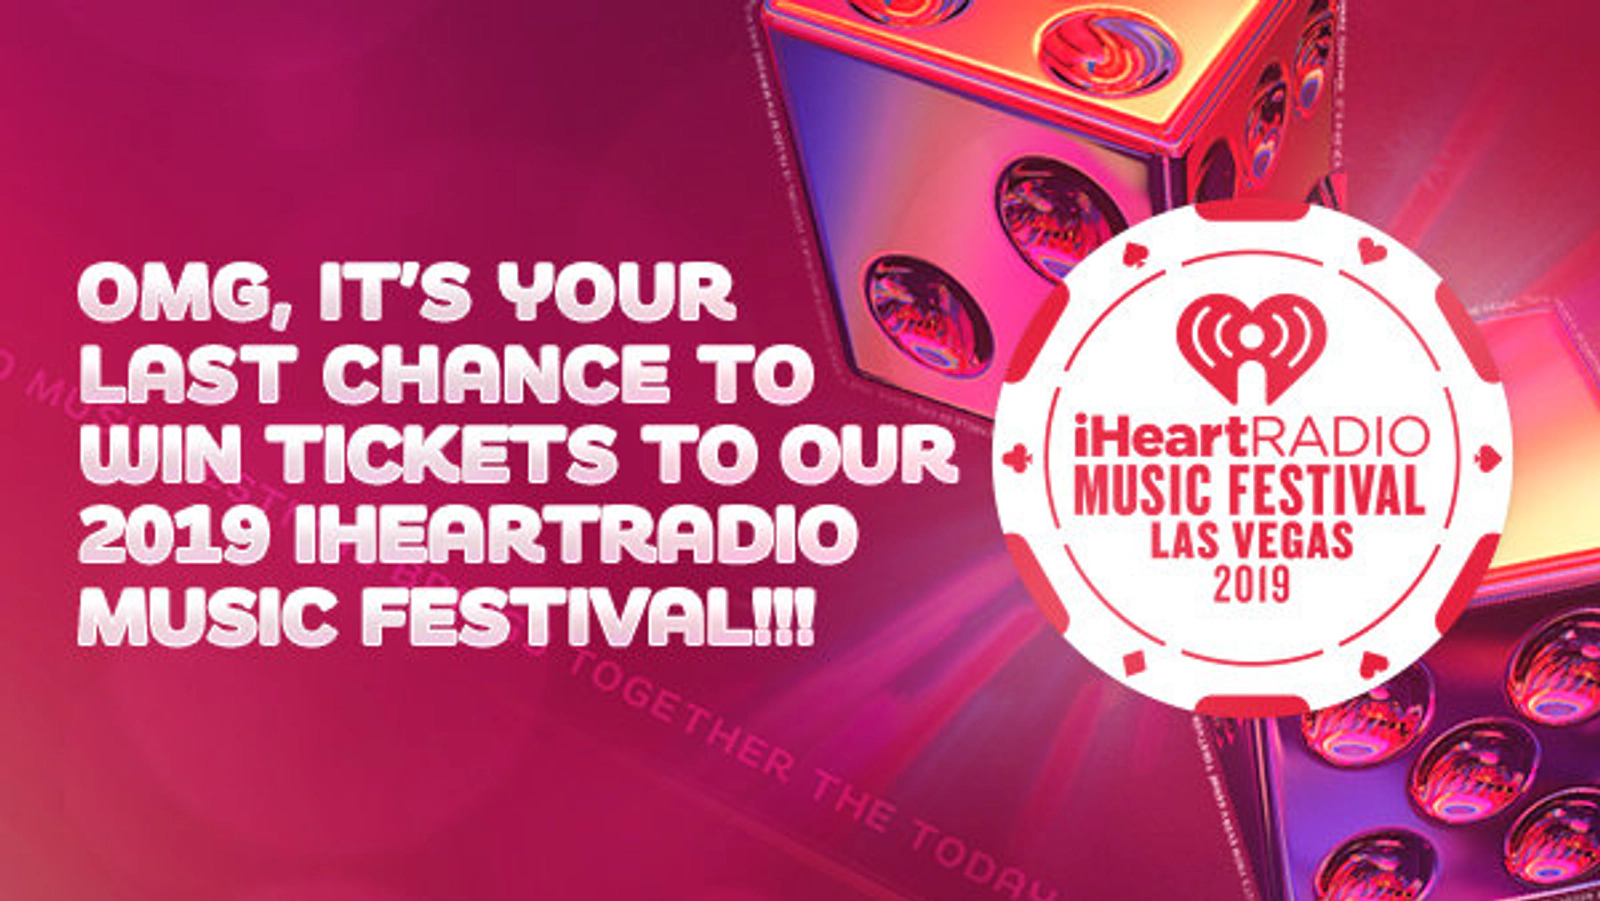 OMG, It’s Your Last Chance To Win Ticket To Our 2019 iHEARTRADIO MUSIC FESTIVAL!!! - Thumbnail Image